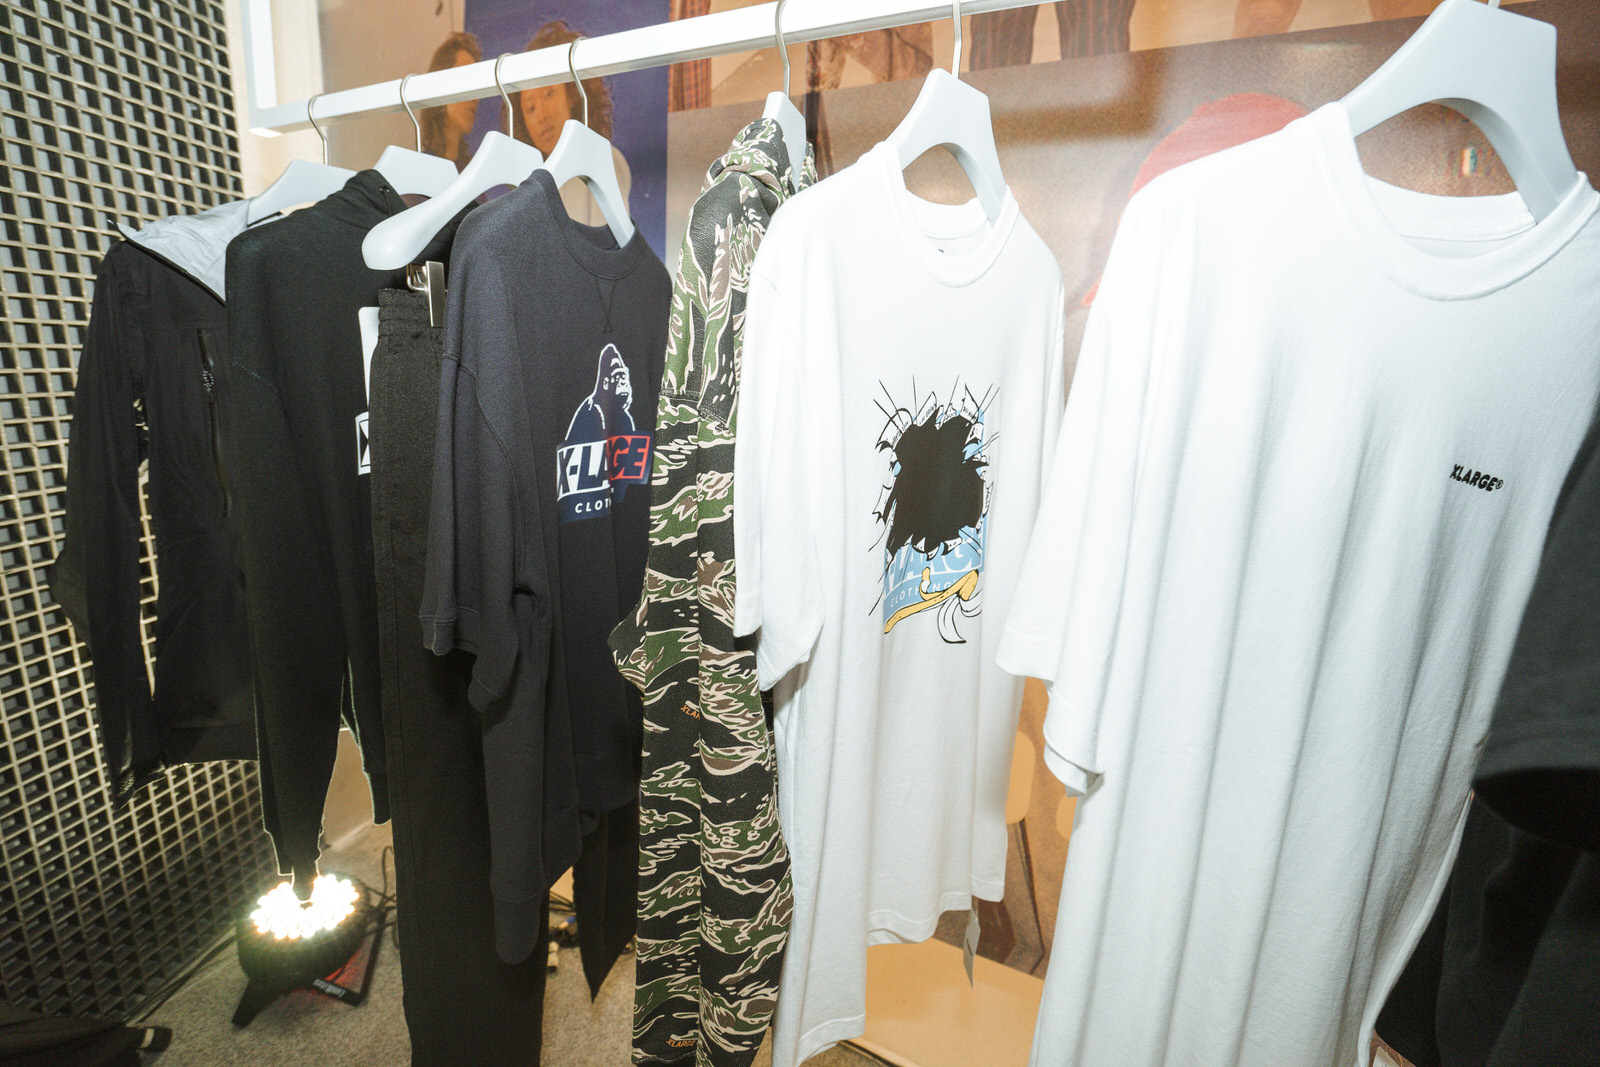 AKIMBO adds more flavor to the ever-growing streetwear scene in Manila ...